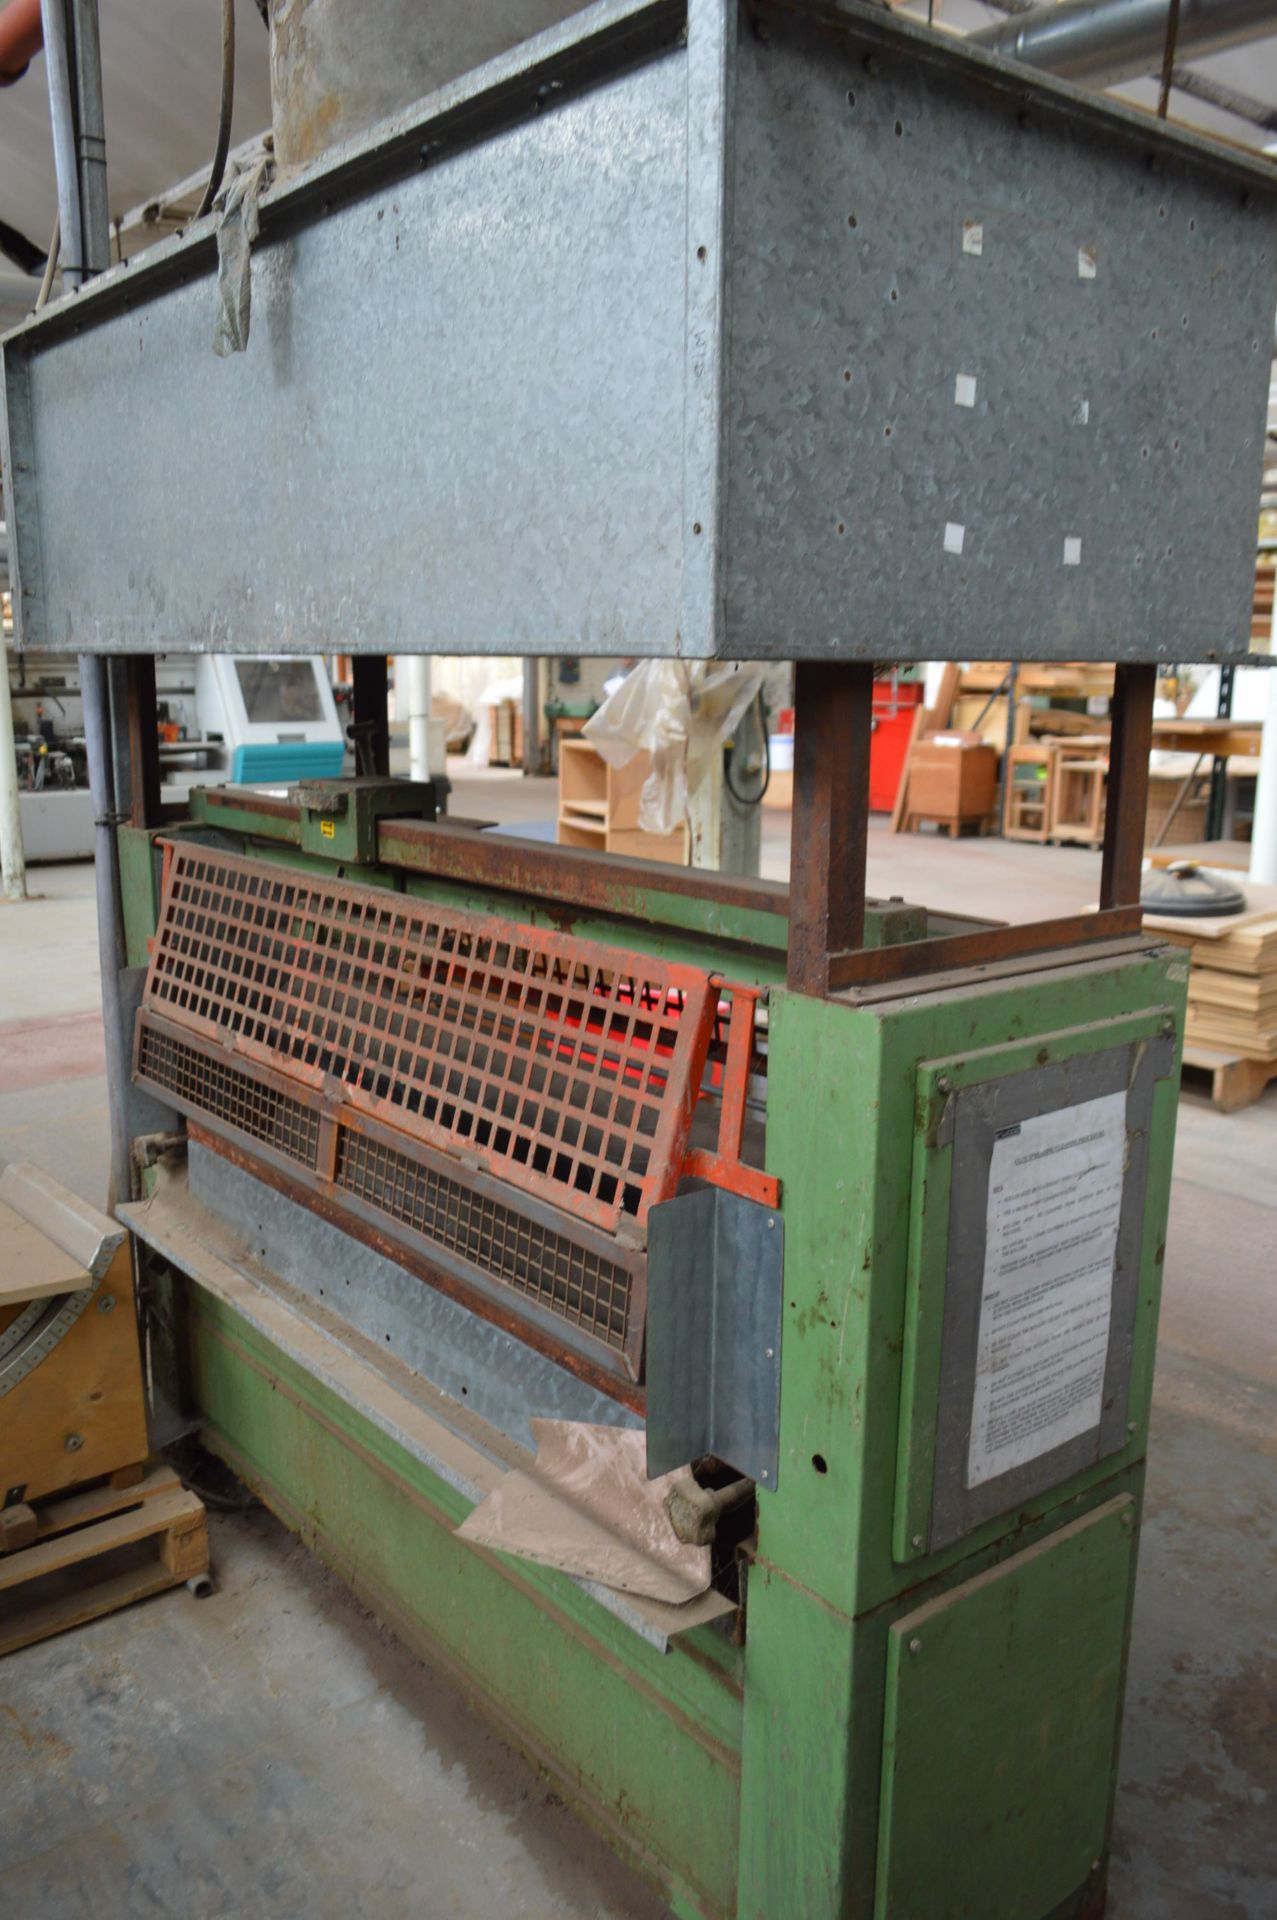 Osama S2R 1300 ROLLER GLUEING MACHINE, serial no. 2392, year of manucttfacture 1997, with extraction - Image 4 of 6